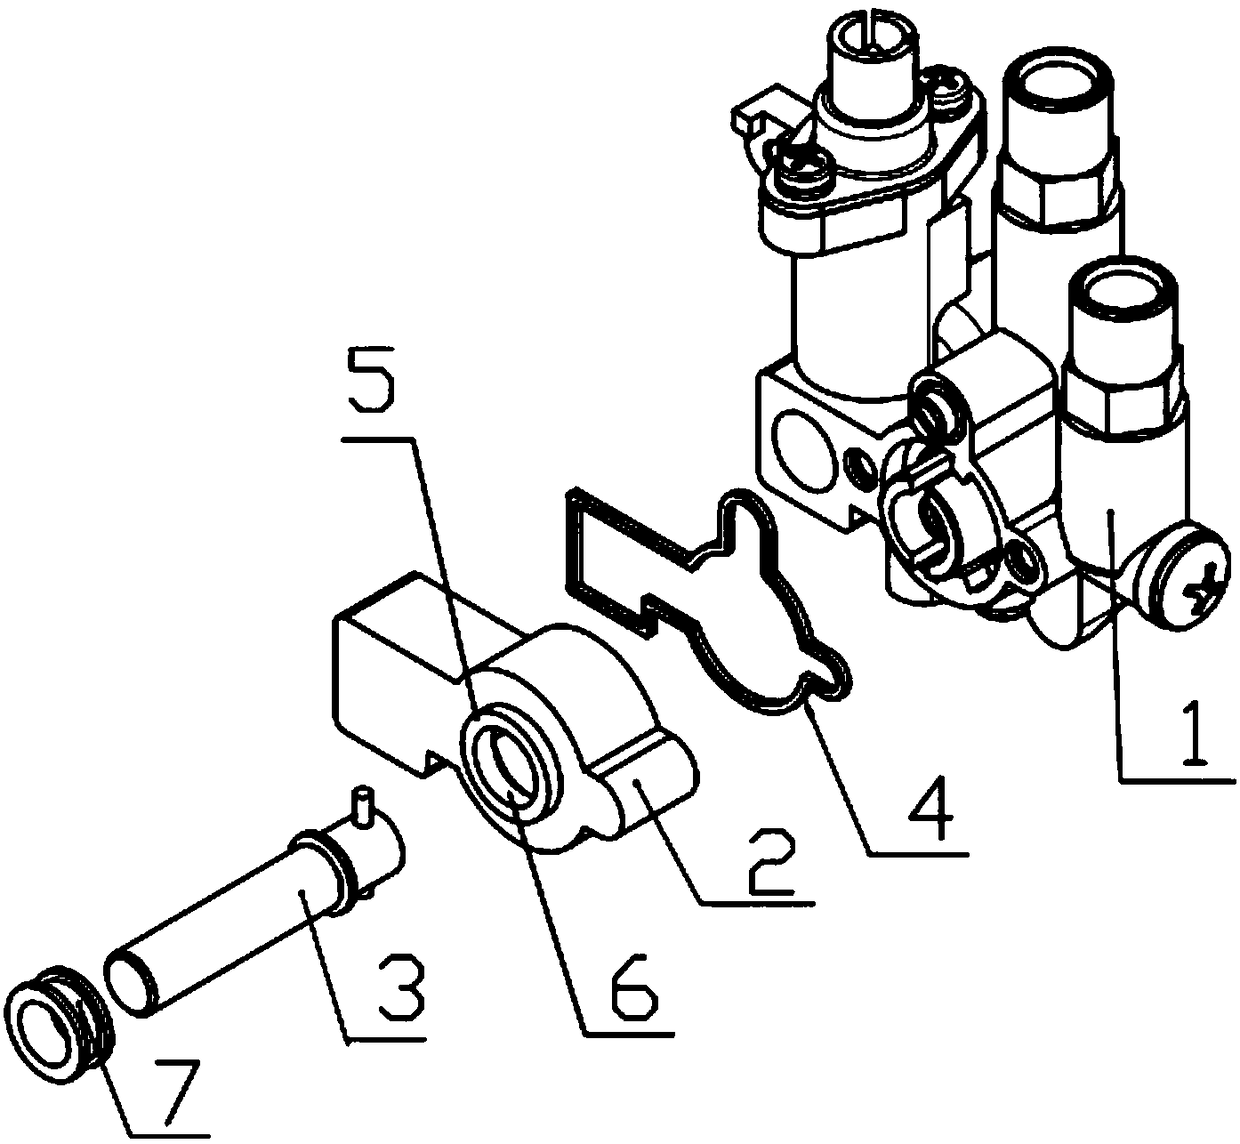 Plug valve assembly of embedded gas stove